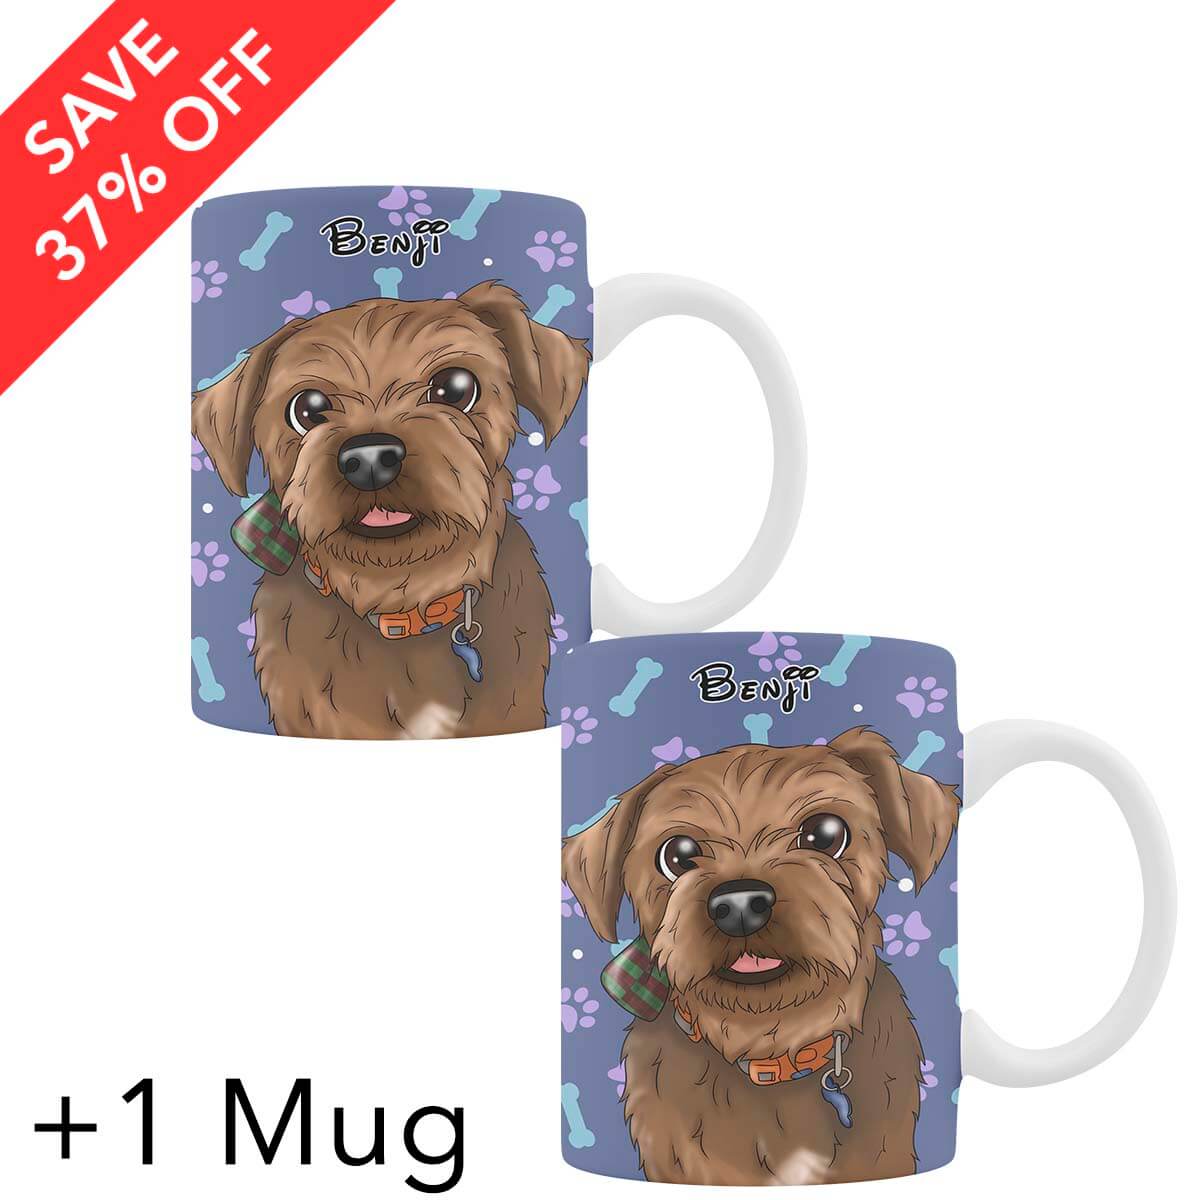 Add An Additional Coffee Mug To Your Order - Save 37% OFF